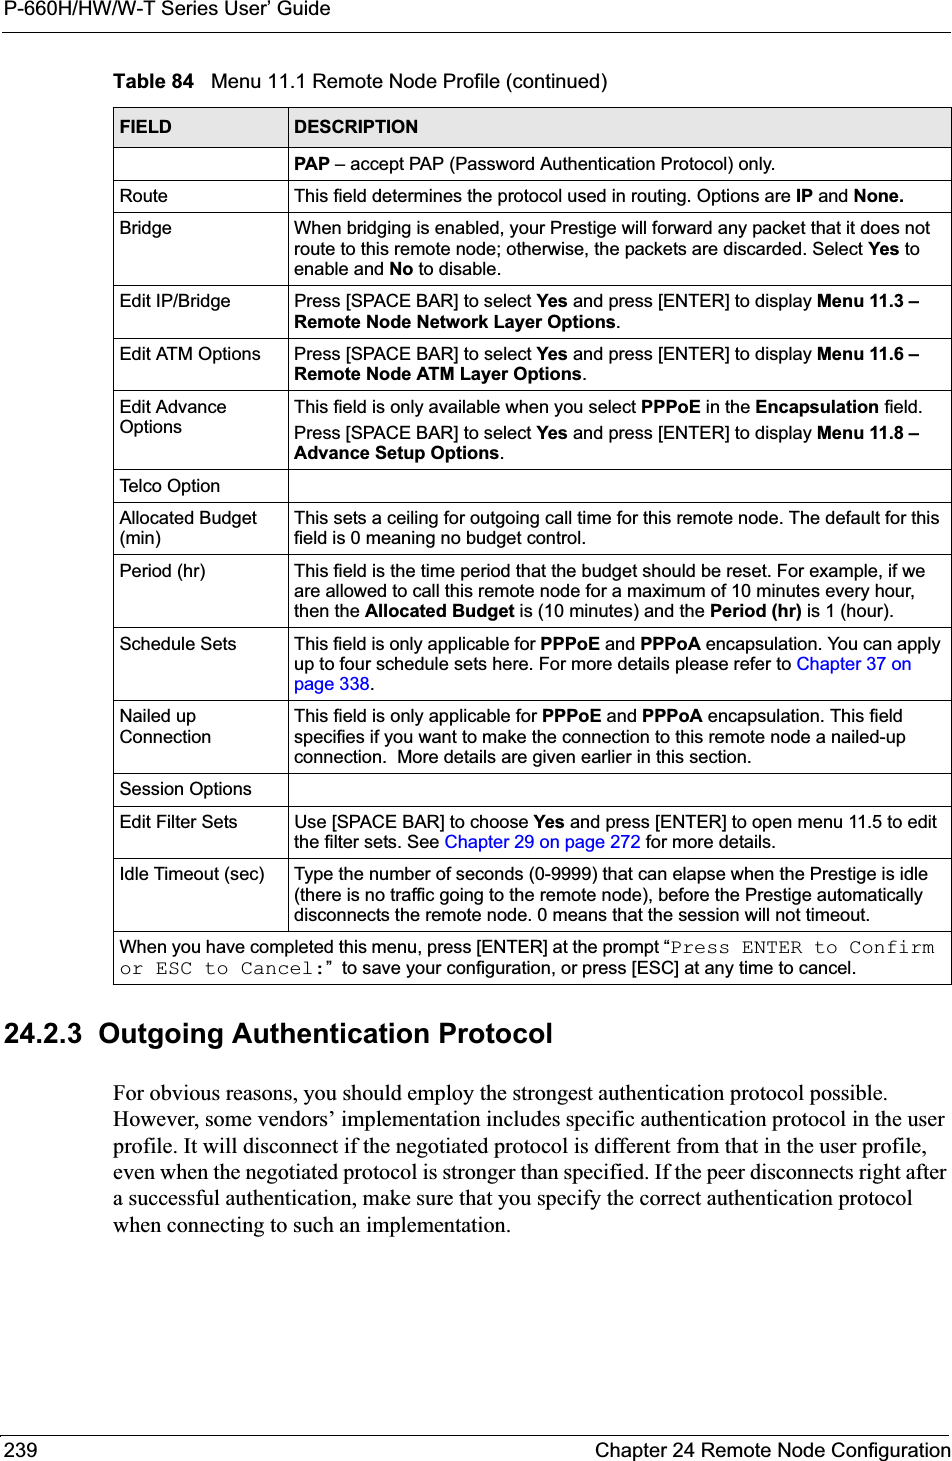 P-660H/HW/W-T Series User’ Guide239 Chapter 24 Remote Node Configuration24.2.3  Outgoing Authentication ProtocolFor obvious reasons, you should employ the strongest authentication protocol possible. However, some vendors’ implementation includes specific authentication protocol in the user profile. It will disconnect if the negotiated protocol is different from that in the user profile, even when the negotiated protocol is stronger than specified. If the peer disconnects right after a successful authentication, make sure that you specify the correct authentication protocol when connecting to such an implementation.PAP – accept PAP (Password Authentication Protocol) only.Route This field determines the protocol used in routing. Options are IP and None.Bridge When bridging is enabled, your Prestige will forward any packet that it does not route to this remote node; otherwise, the packets are discarded. Select Yes to enable and No to disable.Edit IP/Bridge Press [SPACE BAR] to select Yes and press [ENTER] to display Menu 11.3 – Remote Node Network Layer Options.Edit ATM Options Press [SPACE BAR] to select Yes and press [ENTER] to display Menu 11.6 – Remote Node ATM Layer Options.Edit Advance OptionsThis field is only available when you select PPPoE in the Encapsulation field.Press [SPACE BAR] to select Yes and press [ENTER] to display Menu 11.8 – Advance Setup Options.Telco OptionAllocated Budget (min)This sets a ceiling for outgoing call time for this remote node. The default for this field is 0 meaning no budget control. Period (hr) This field is the time period that the budget should be reset. For example, if we are allowed to call this remote node for a maximum of 10 minutes every hour, then the Allocated Budget is (10 minutes) and the Period (hr) is 1 (hour).Schedule Sets This field is only applicable for PPPoE and PPPoA encapsulation. You can apply up to four schedule sets here. For more details please refer to Chapter 37 on page 338.Nailed up ConnectionThis field is only applicable for PPPoE and PPPoA encapsulation. This field specifies if you want to make the connection to this remote node a nailed-up connection.  More details are given earlier in this section.Session OptionsEdit Filter Sets Use [SPACE BAR] to choose Yes and press [ENTER] to open menu 11.5 to edit the filter sets. See Chapter 29 on page 272 for more details.Idle Timeout (sec) Type the number of seconds (0-9999) that can elapse when the Prestige is idle (there is no traffic going to the remote node), before the Prestige automatically disconnects the remote node. 0 means that the session will not timeout.When you have completed this menu, press [ENTER] at the prompt “Press ENTER to Confirm or ESC to Cancel:”  to save your configuration, or press [ESC] at any time to cancel.Table 84   Menu 11.1 Remote Node Profile (continued)FIELD DESCRIPTION